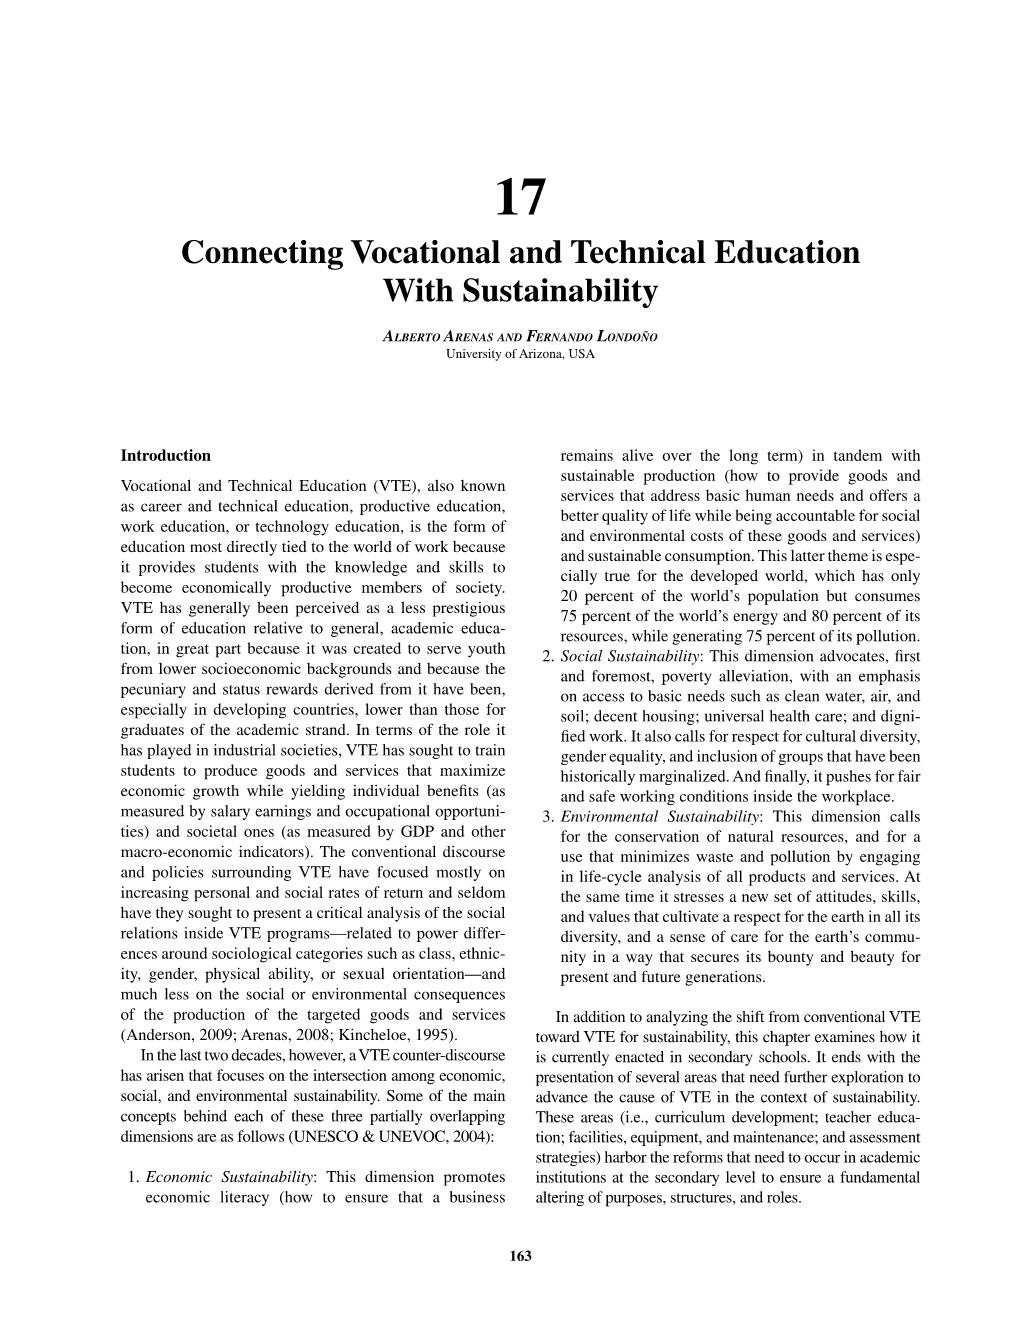 Connecting Vocational and Technical Education with Sustainability